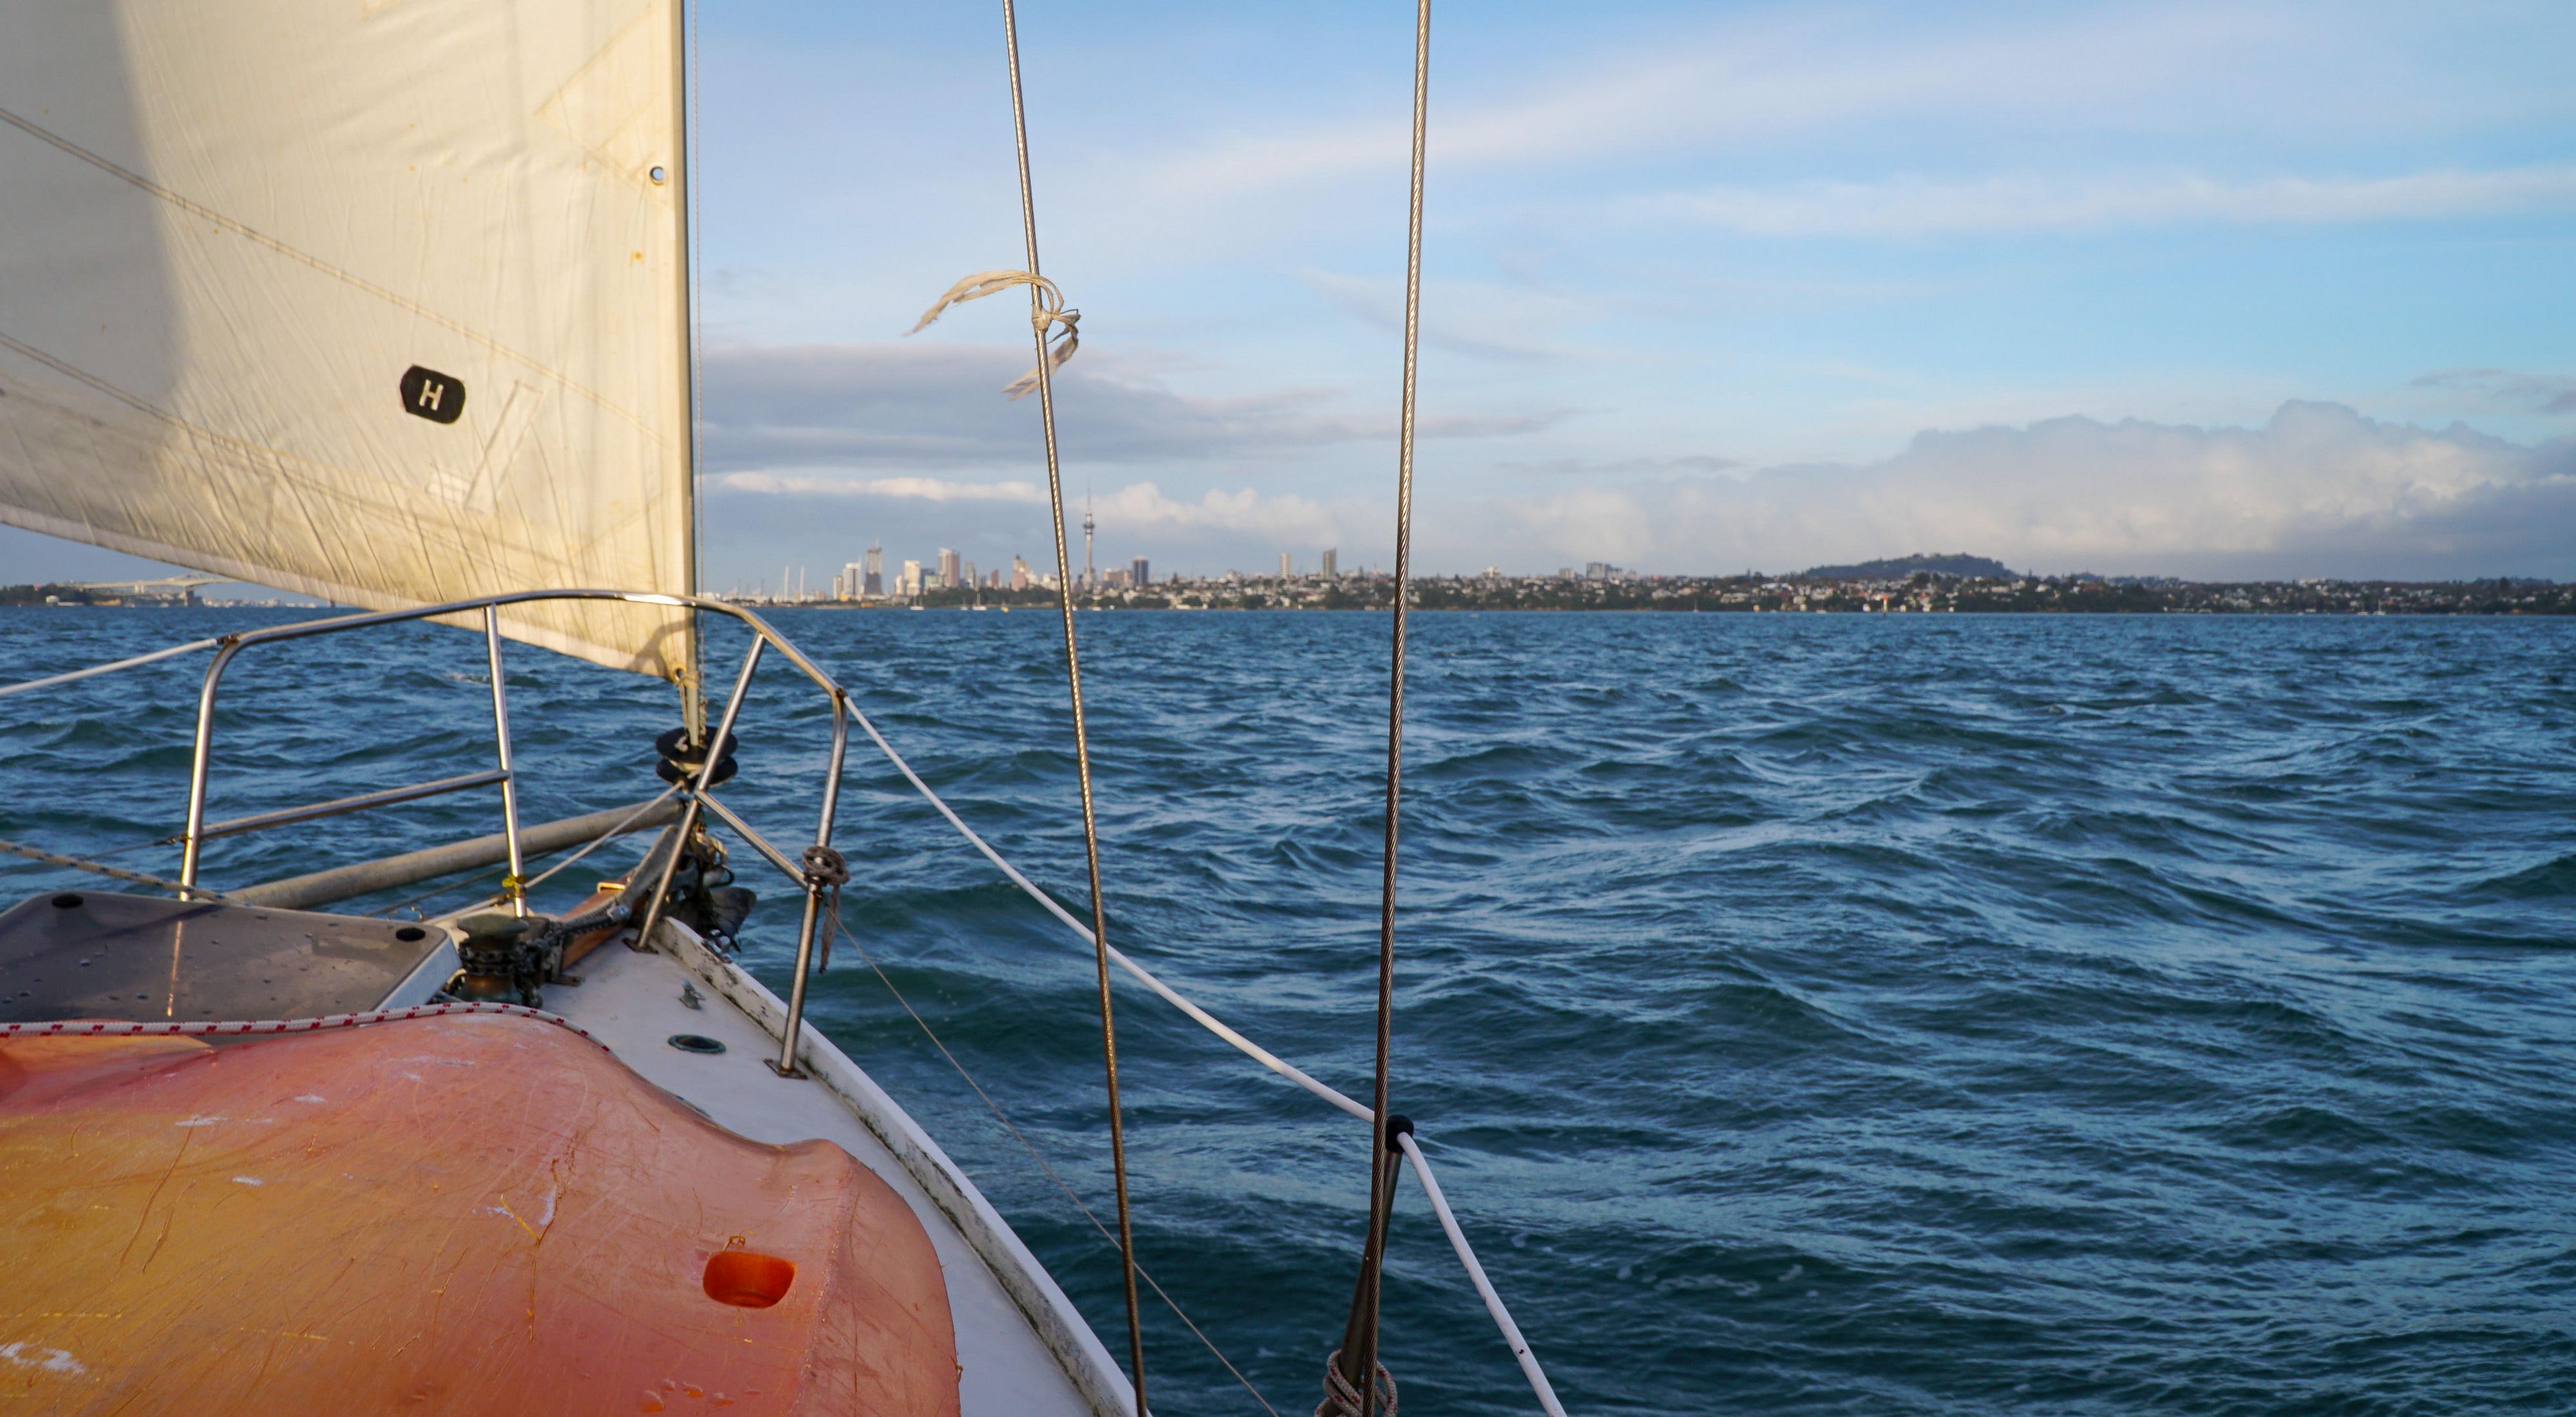 View from a sailboat in a harbor.